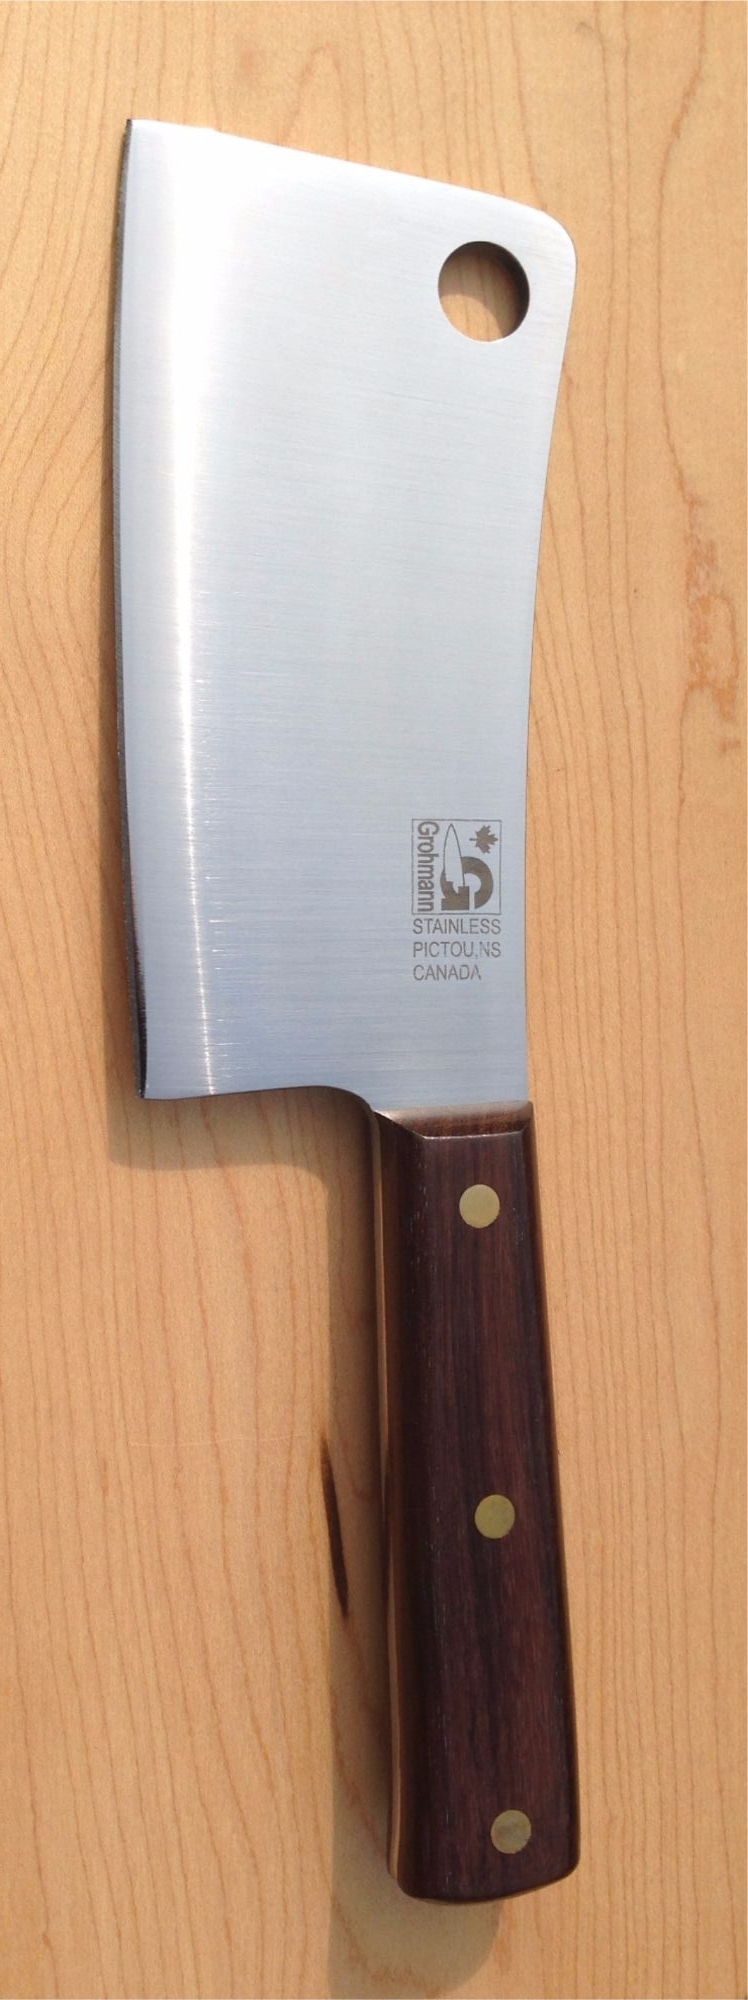 FULL TANG Cleaver; thick heavy duty blade 11